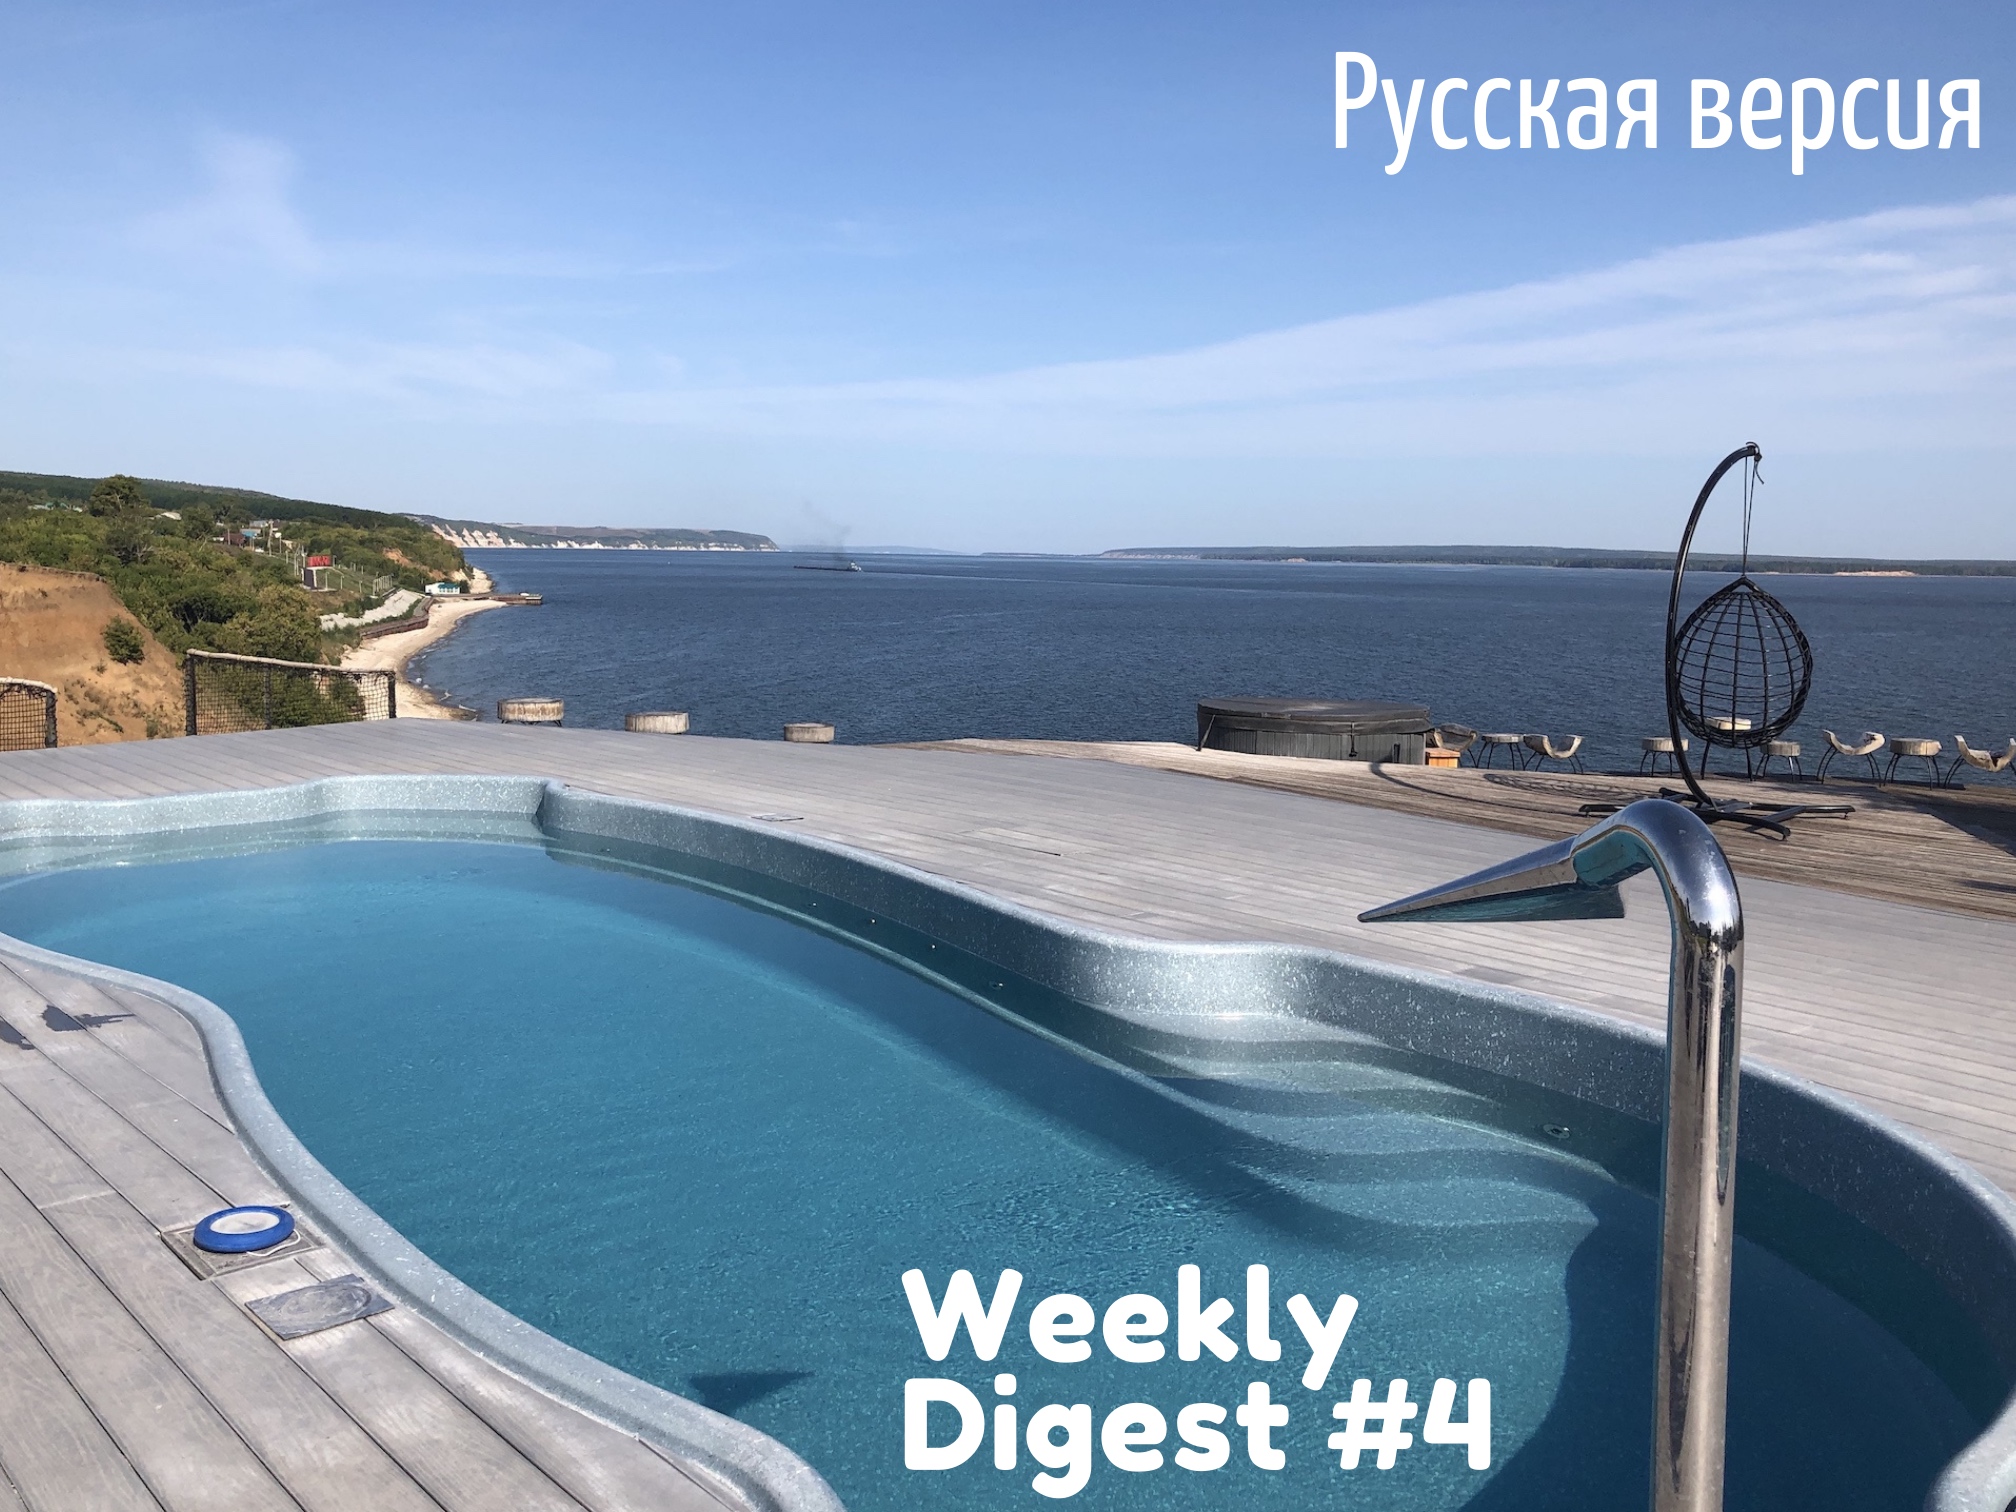 Weekly Digest 4, russian version